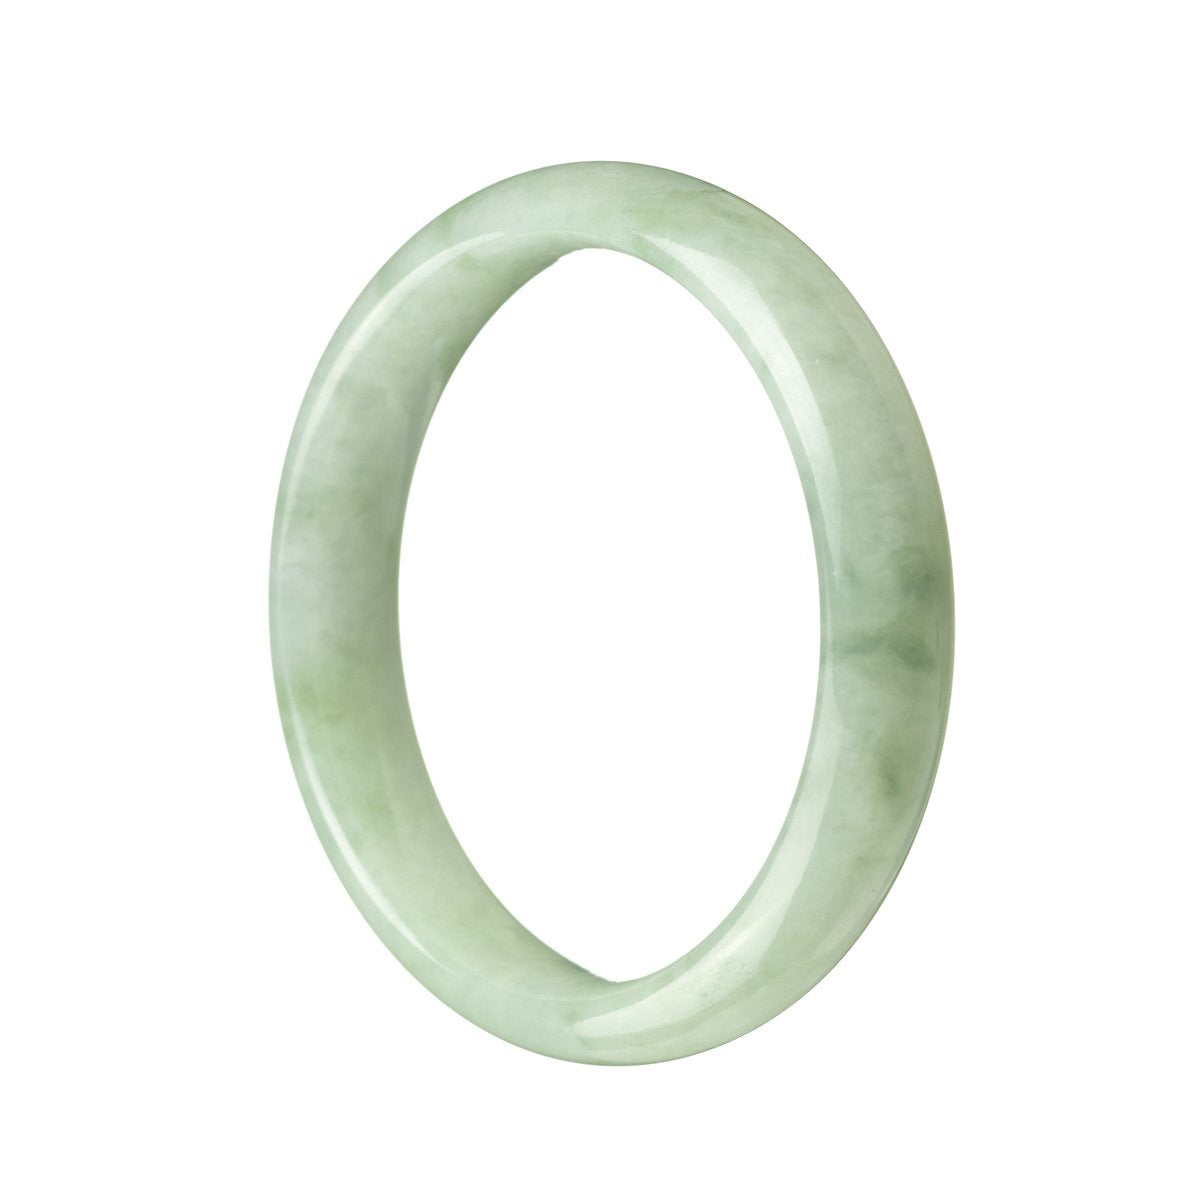 A beautiful half-moon shaped green jadeite bangle, 56mm in size, crafted with genuine natural jadeite by MAYS.